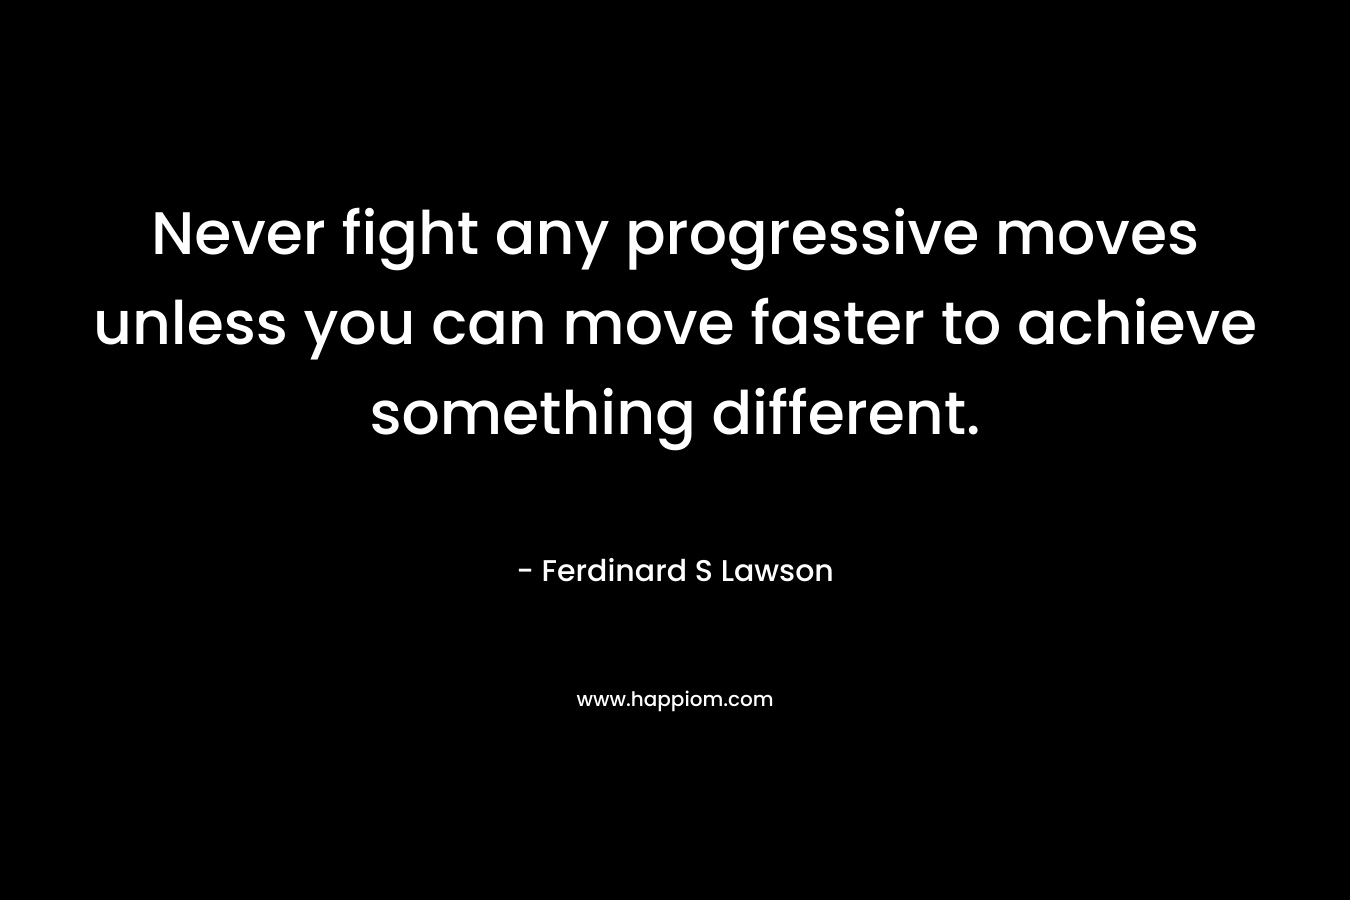 Never fight any progressive moves unless you can move faster to achieve something different.